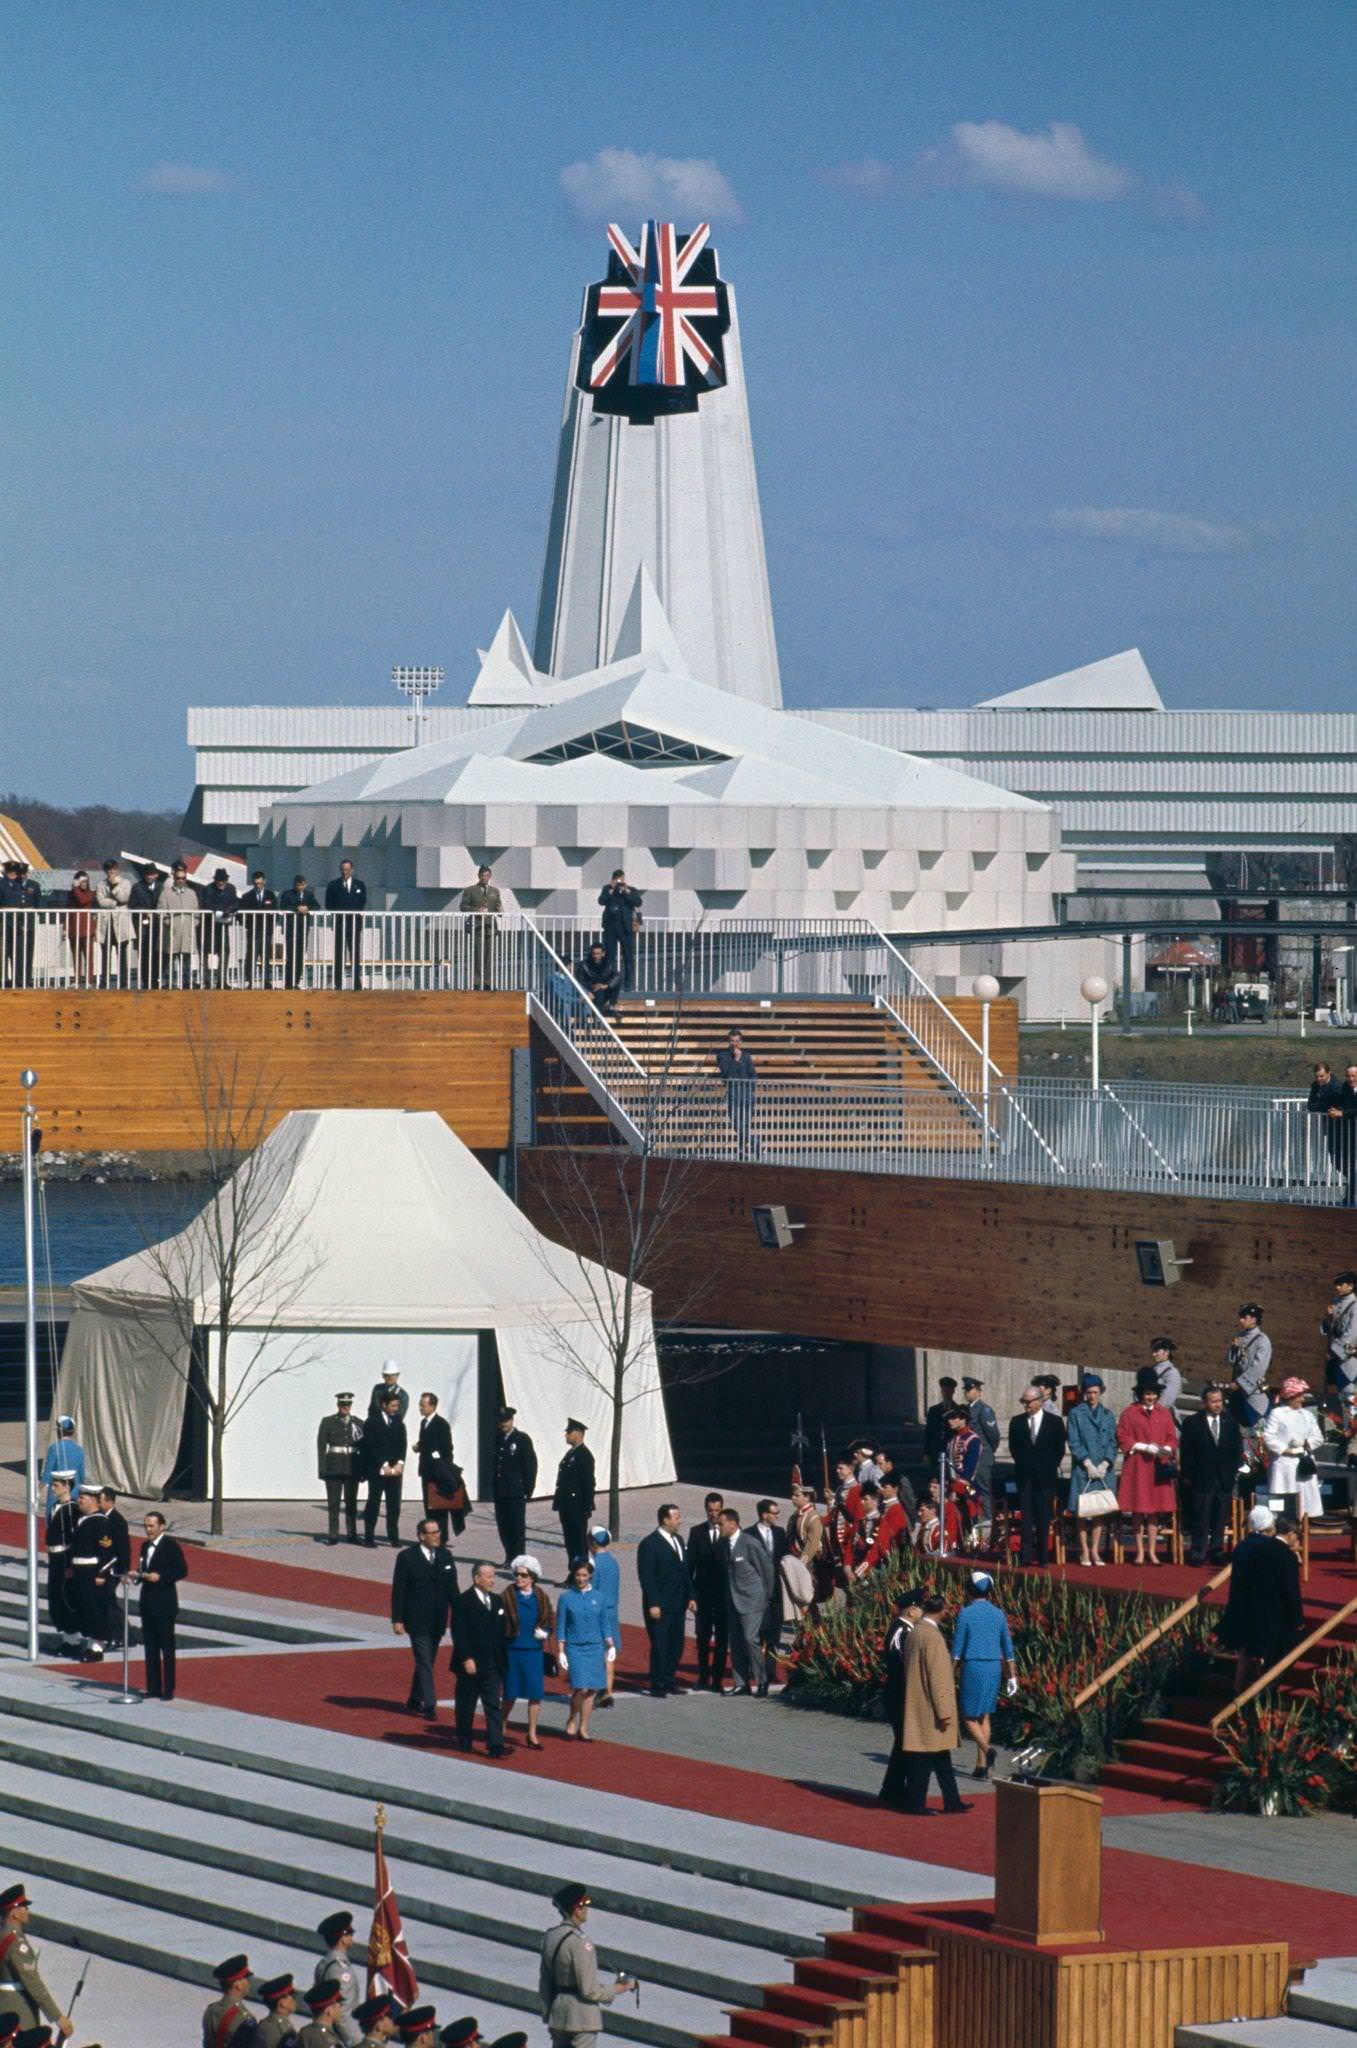 View of the British Pavilion, designed by Scottish architect Basil Spence, during an opening ceremony at Expo 67